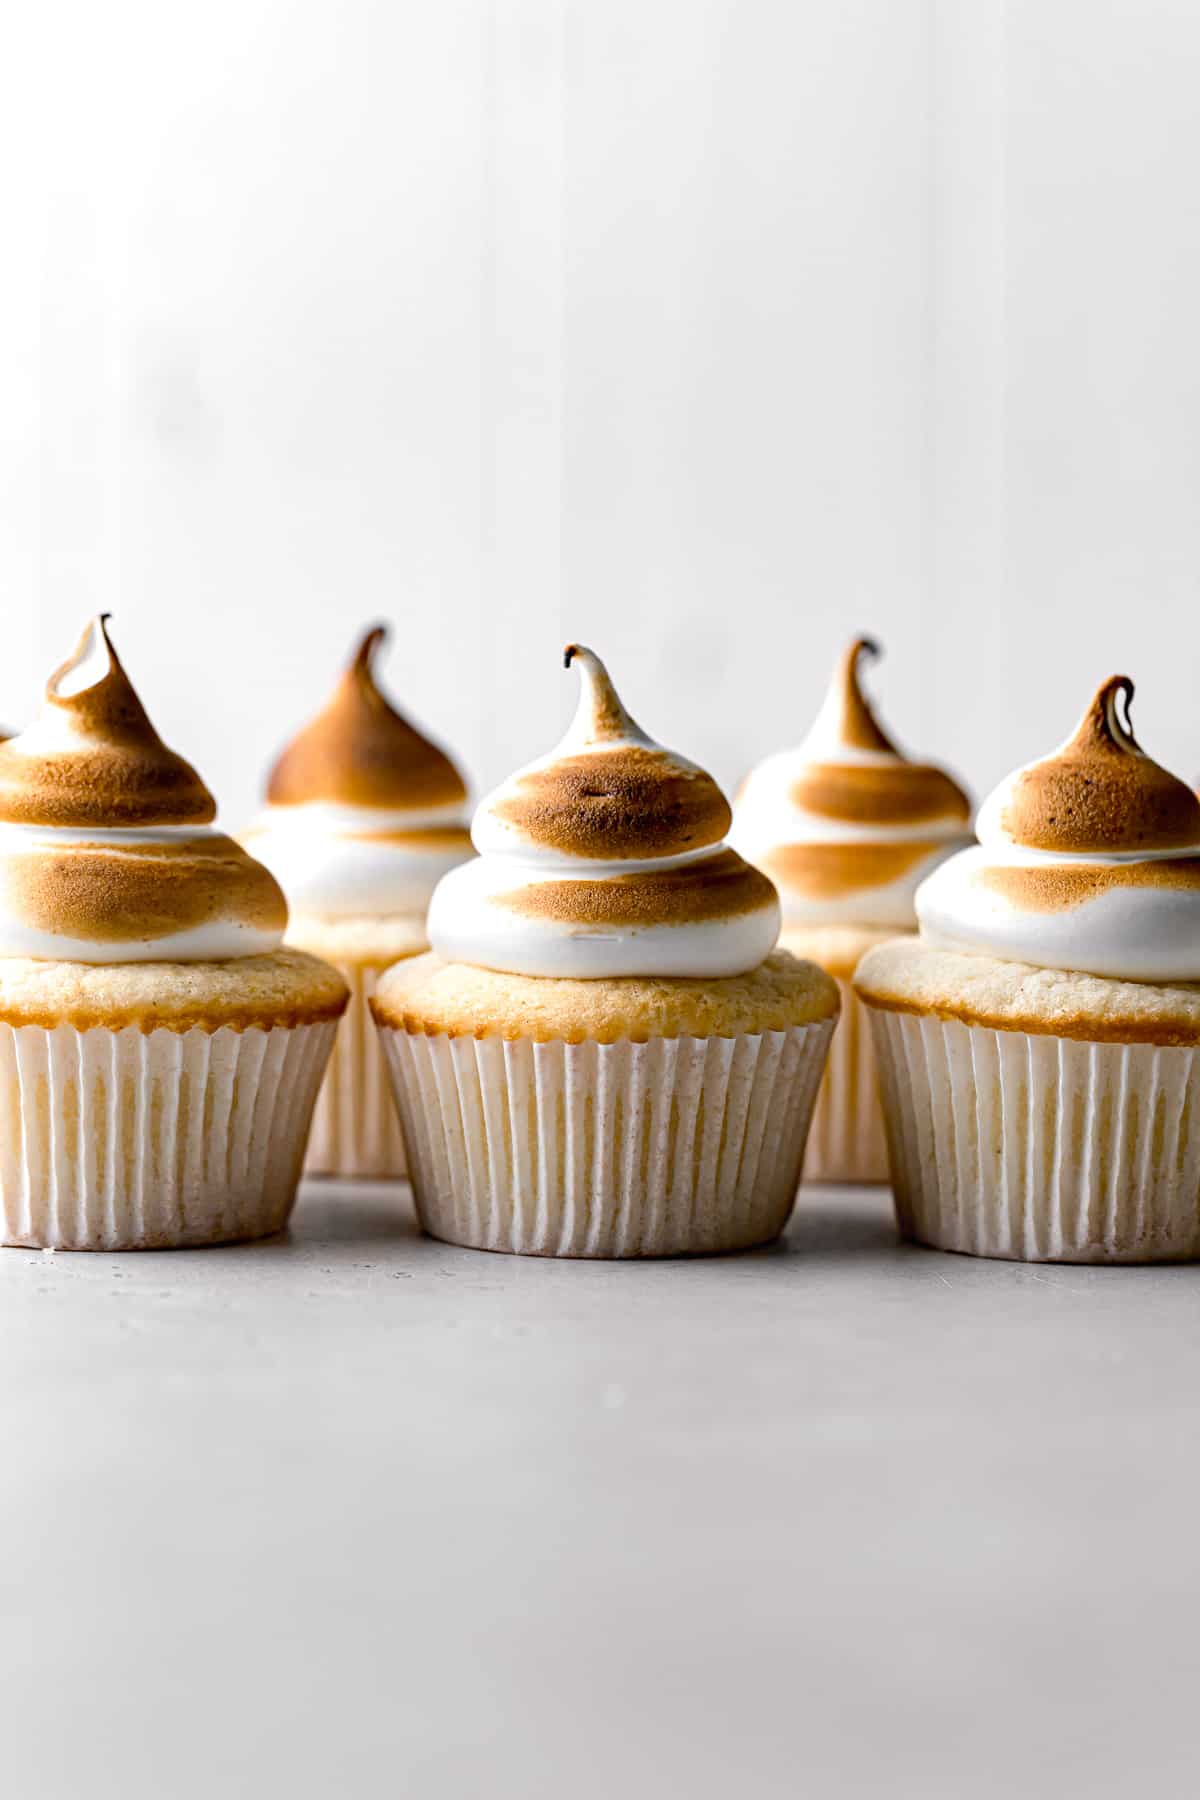 lemon cupcakes with torched meringue lined up in a row.